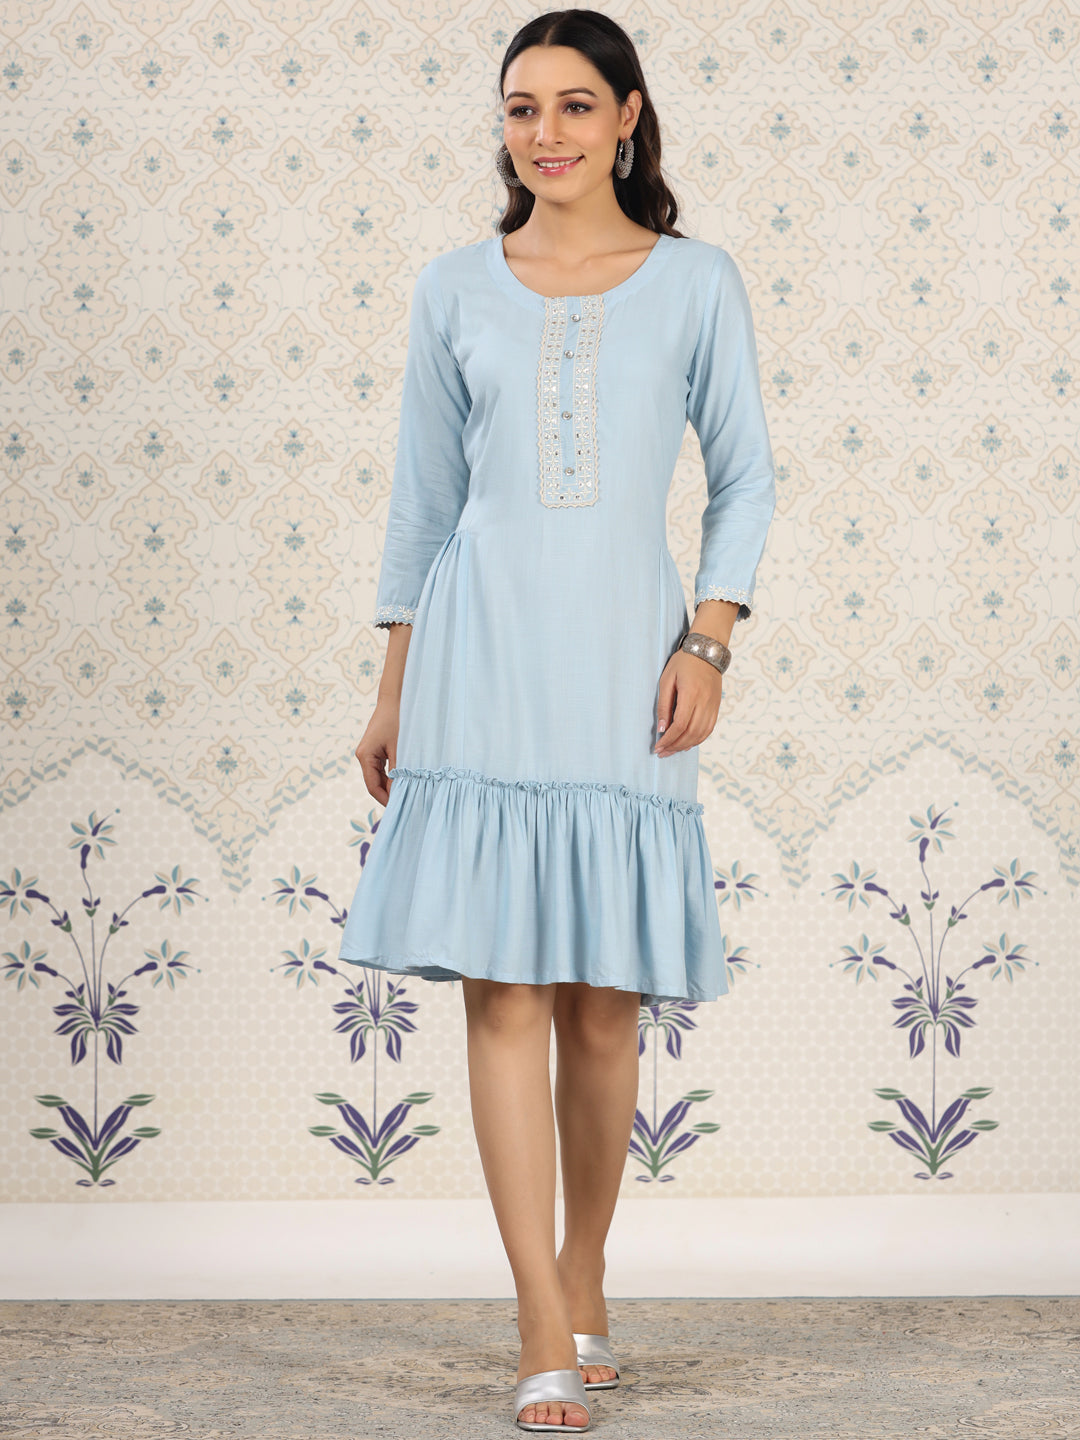 Elegant Sky Blue Embroidered Short Top in Party-Ready RAYON Fabric